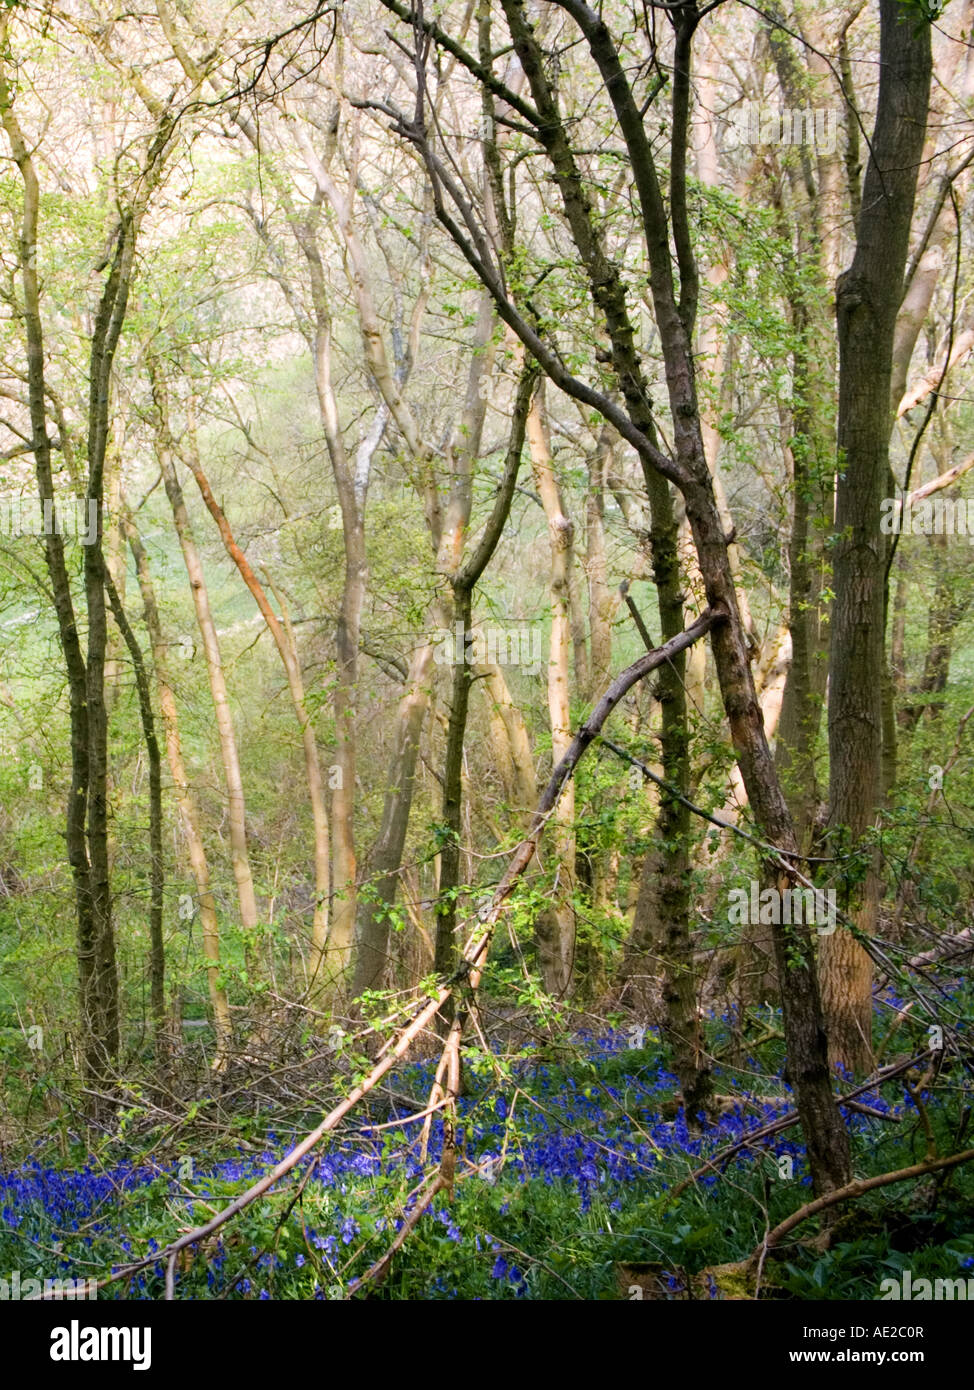 Bluebells in an English wood Stock Photo